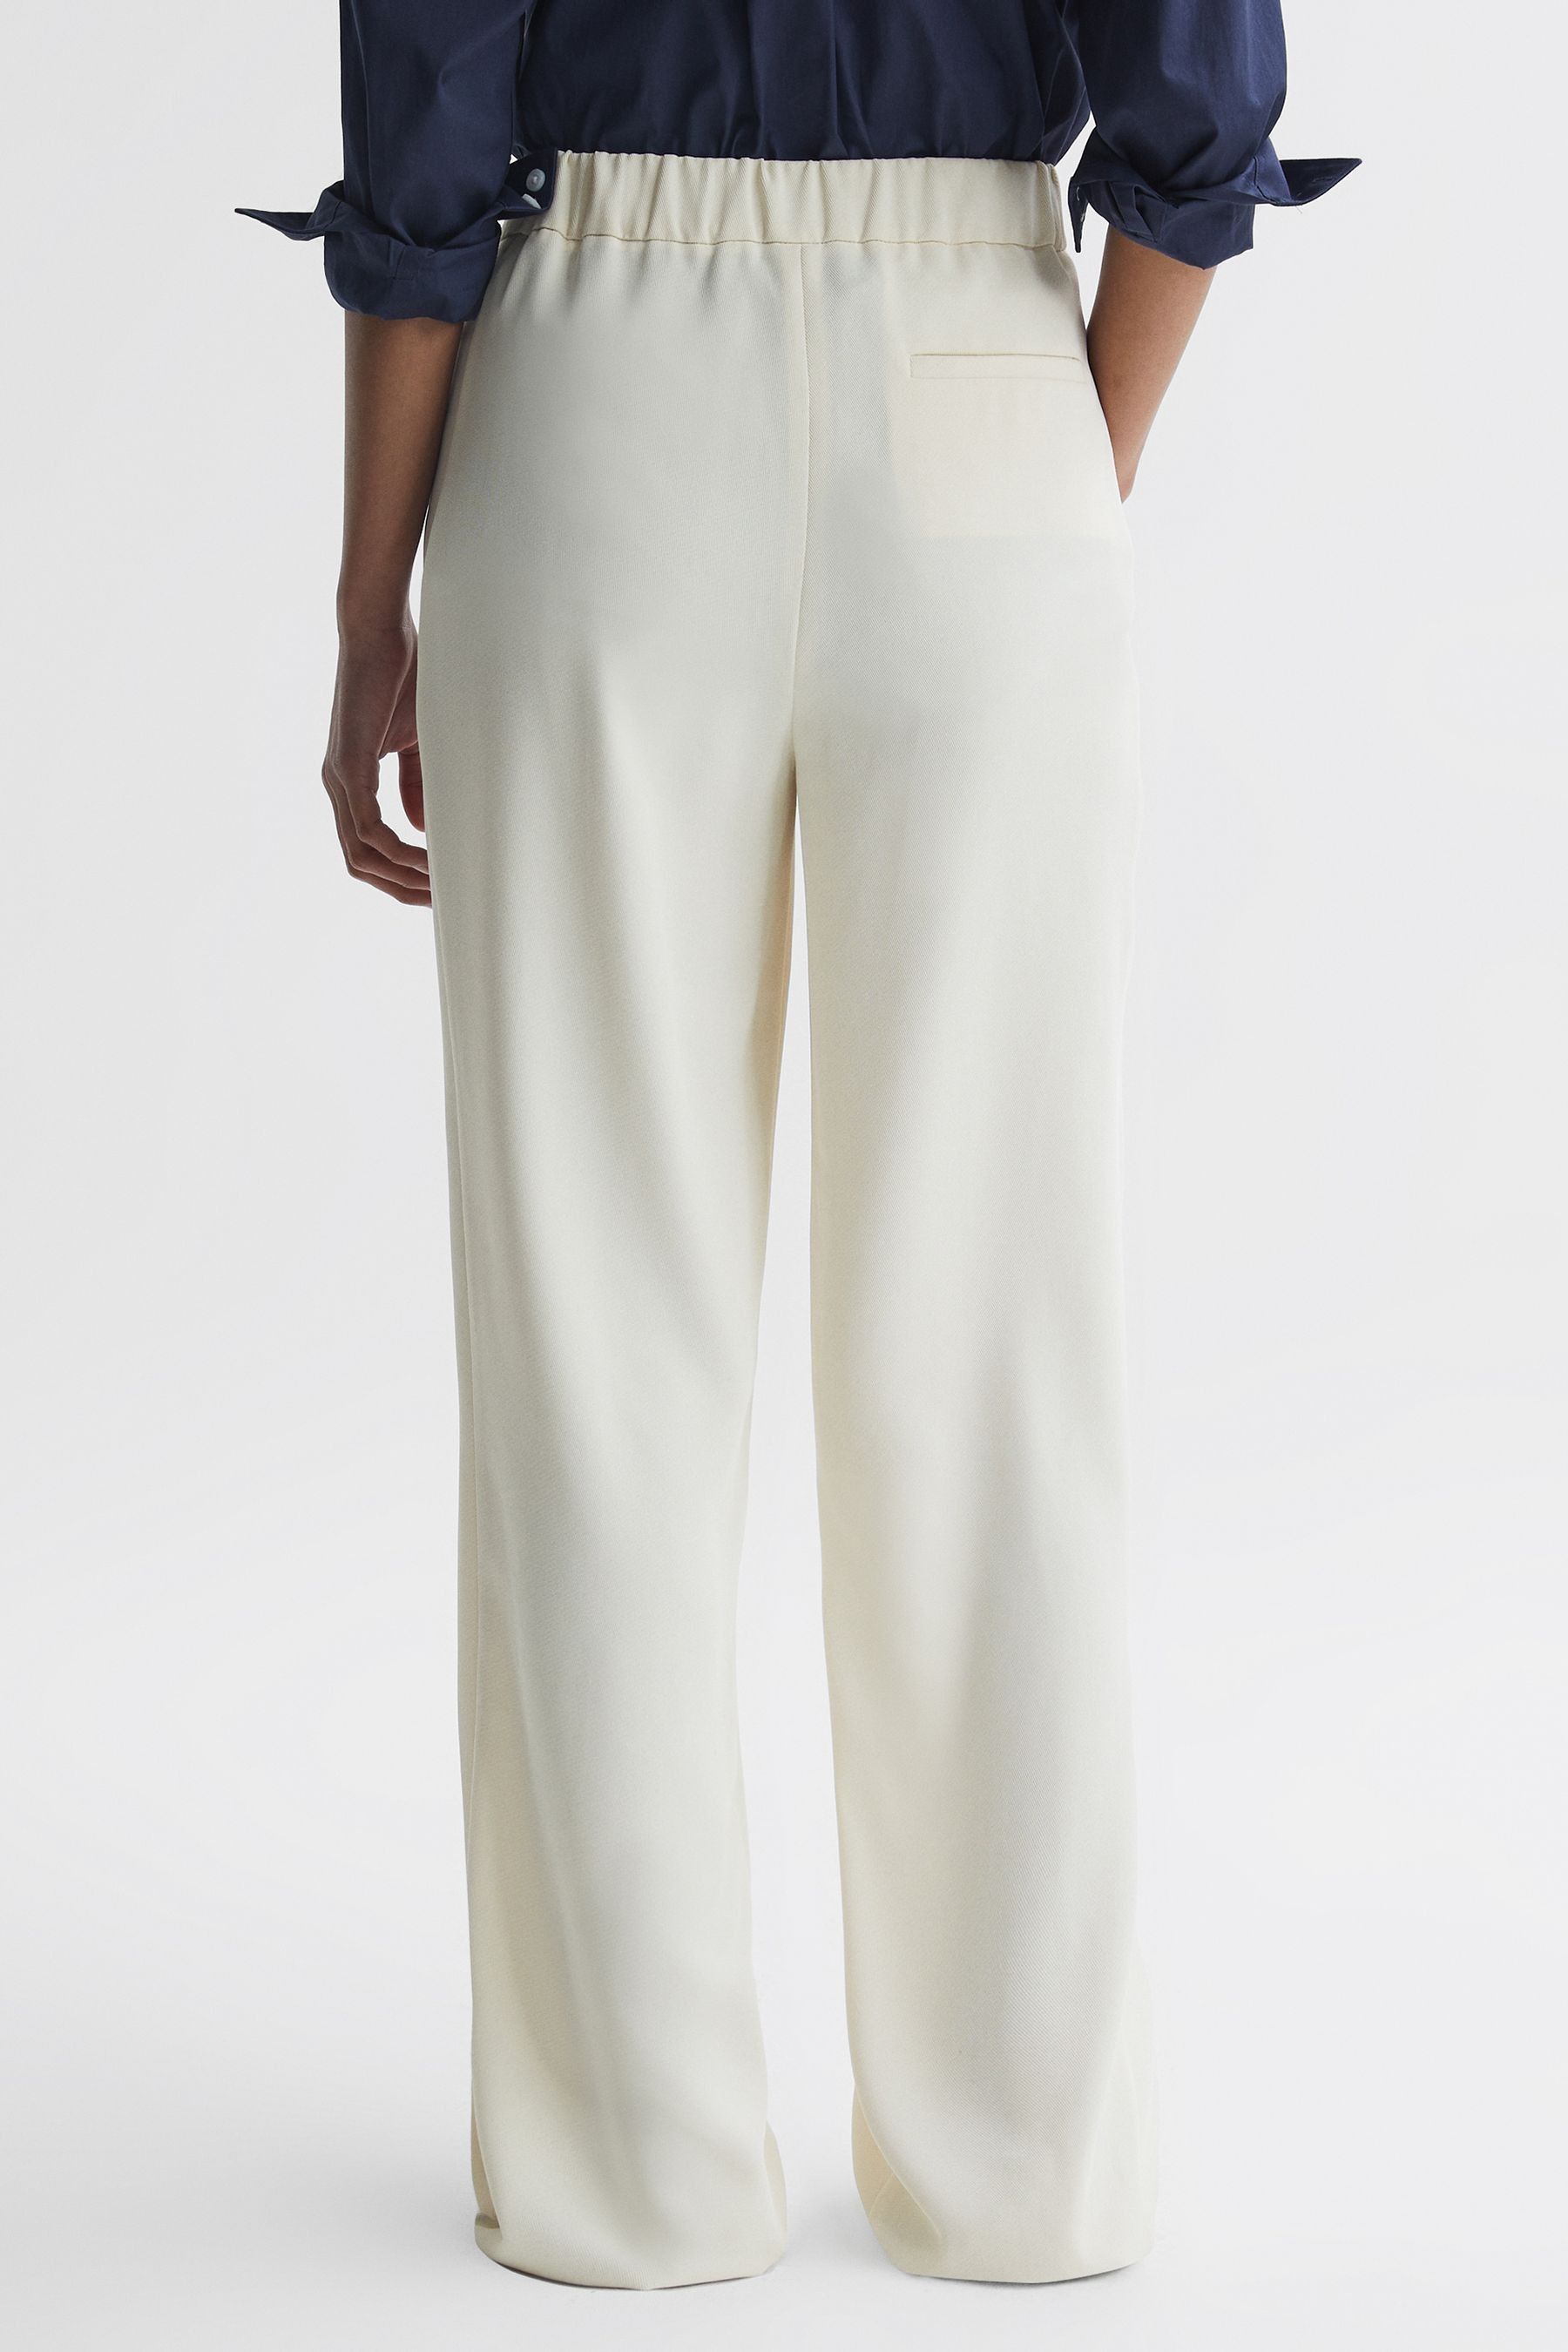 Buy Reiss Cream Aleah Pull On Trousers from the Next UK online shop